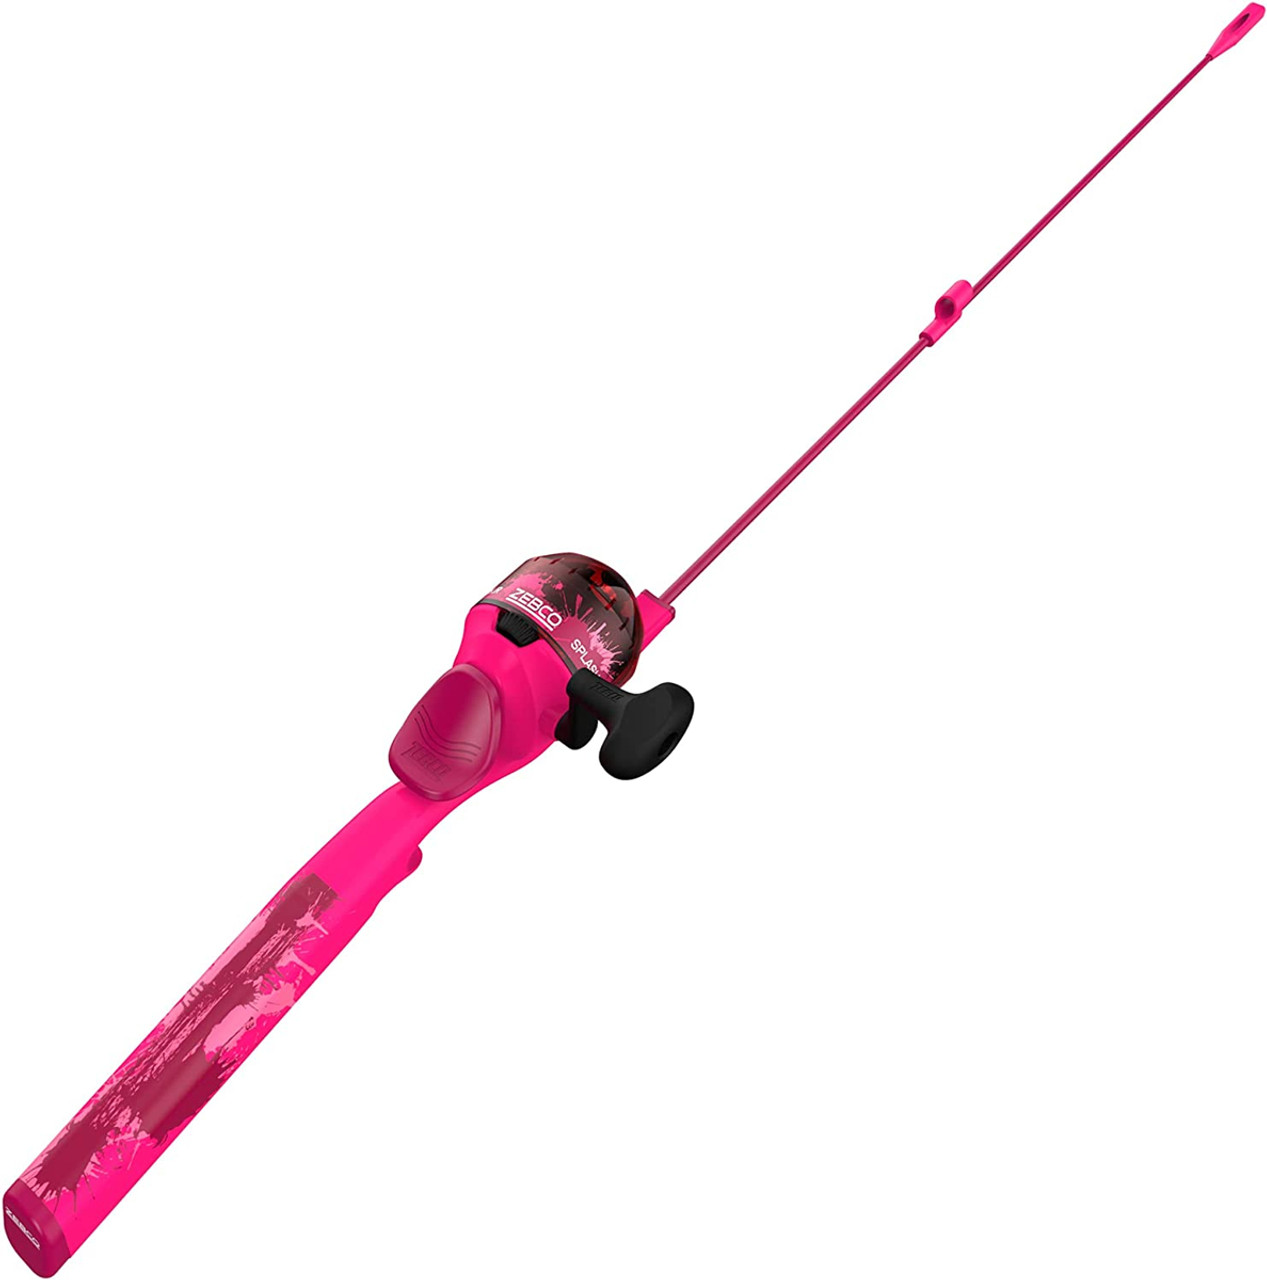 Zebco 202 Spincast Reel and Fishing Rod Combo, 5-Foot 6-Inch 2-Piece Fishing